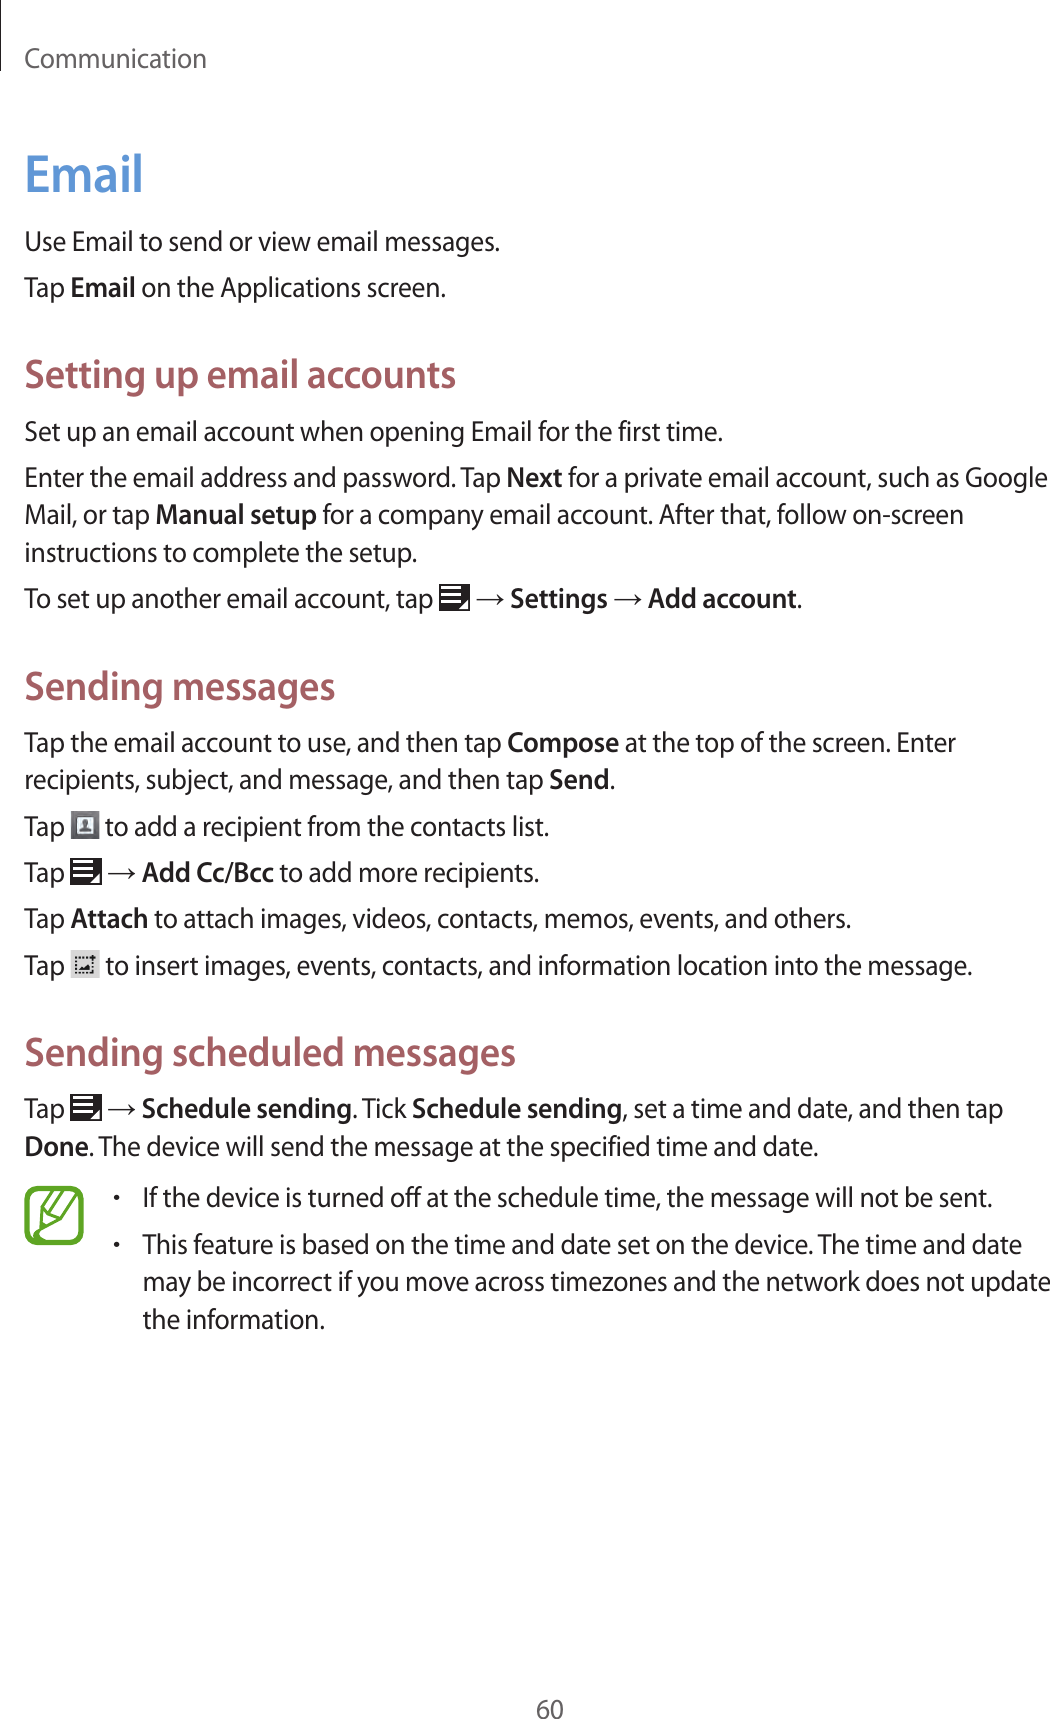 Communication60EmailUse Email to send or view email messages.Tap Email on the Applications screen.Setting up email accountsSet up an email account when opening Email for the first time.Enter the email address and password. Tap Next for a private email account, such as Google Mail, or tap Manual setup for a company email account. After that, follow on-screen instructions to complete the setup.To set up another email account, tap   → Settings → Add account.Sending messagesTap the email account to use, and then tap Compose at the top of the screen. Enter recipients, subject, and message, and then tap Send.Tap   to add a recipient from the contacts list.Tap   → Add Cc/Bcc to add more recipients.Tap Attach to attach images, videos, contacts, memos, events, and others.Tap   to insert images, events, contacts, and information location into the message.Sending scheduled messagesTap   → Schedule sending. Tick Schedule sending, set a time and date, and then tap Done. The device will send the message at the specified time and date.•If the device is turned off at the schedule time, the message will not be sent.•This feature is based on the time and date set on the device. The time and date may be incorrect if you move across timezones and the network does not update the information.